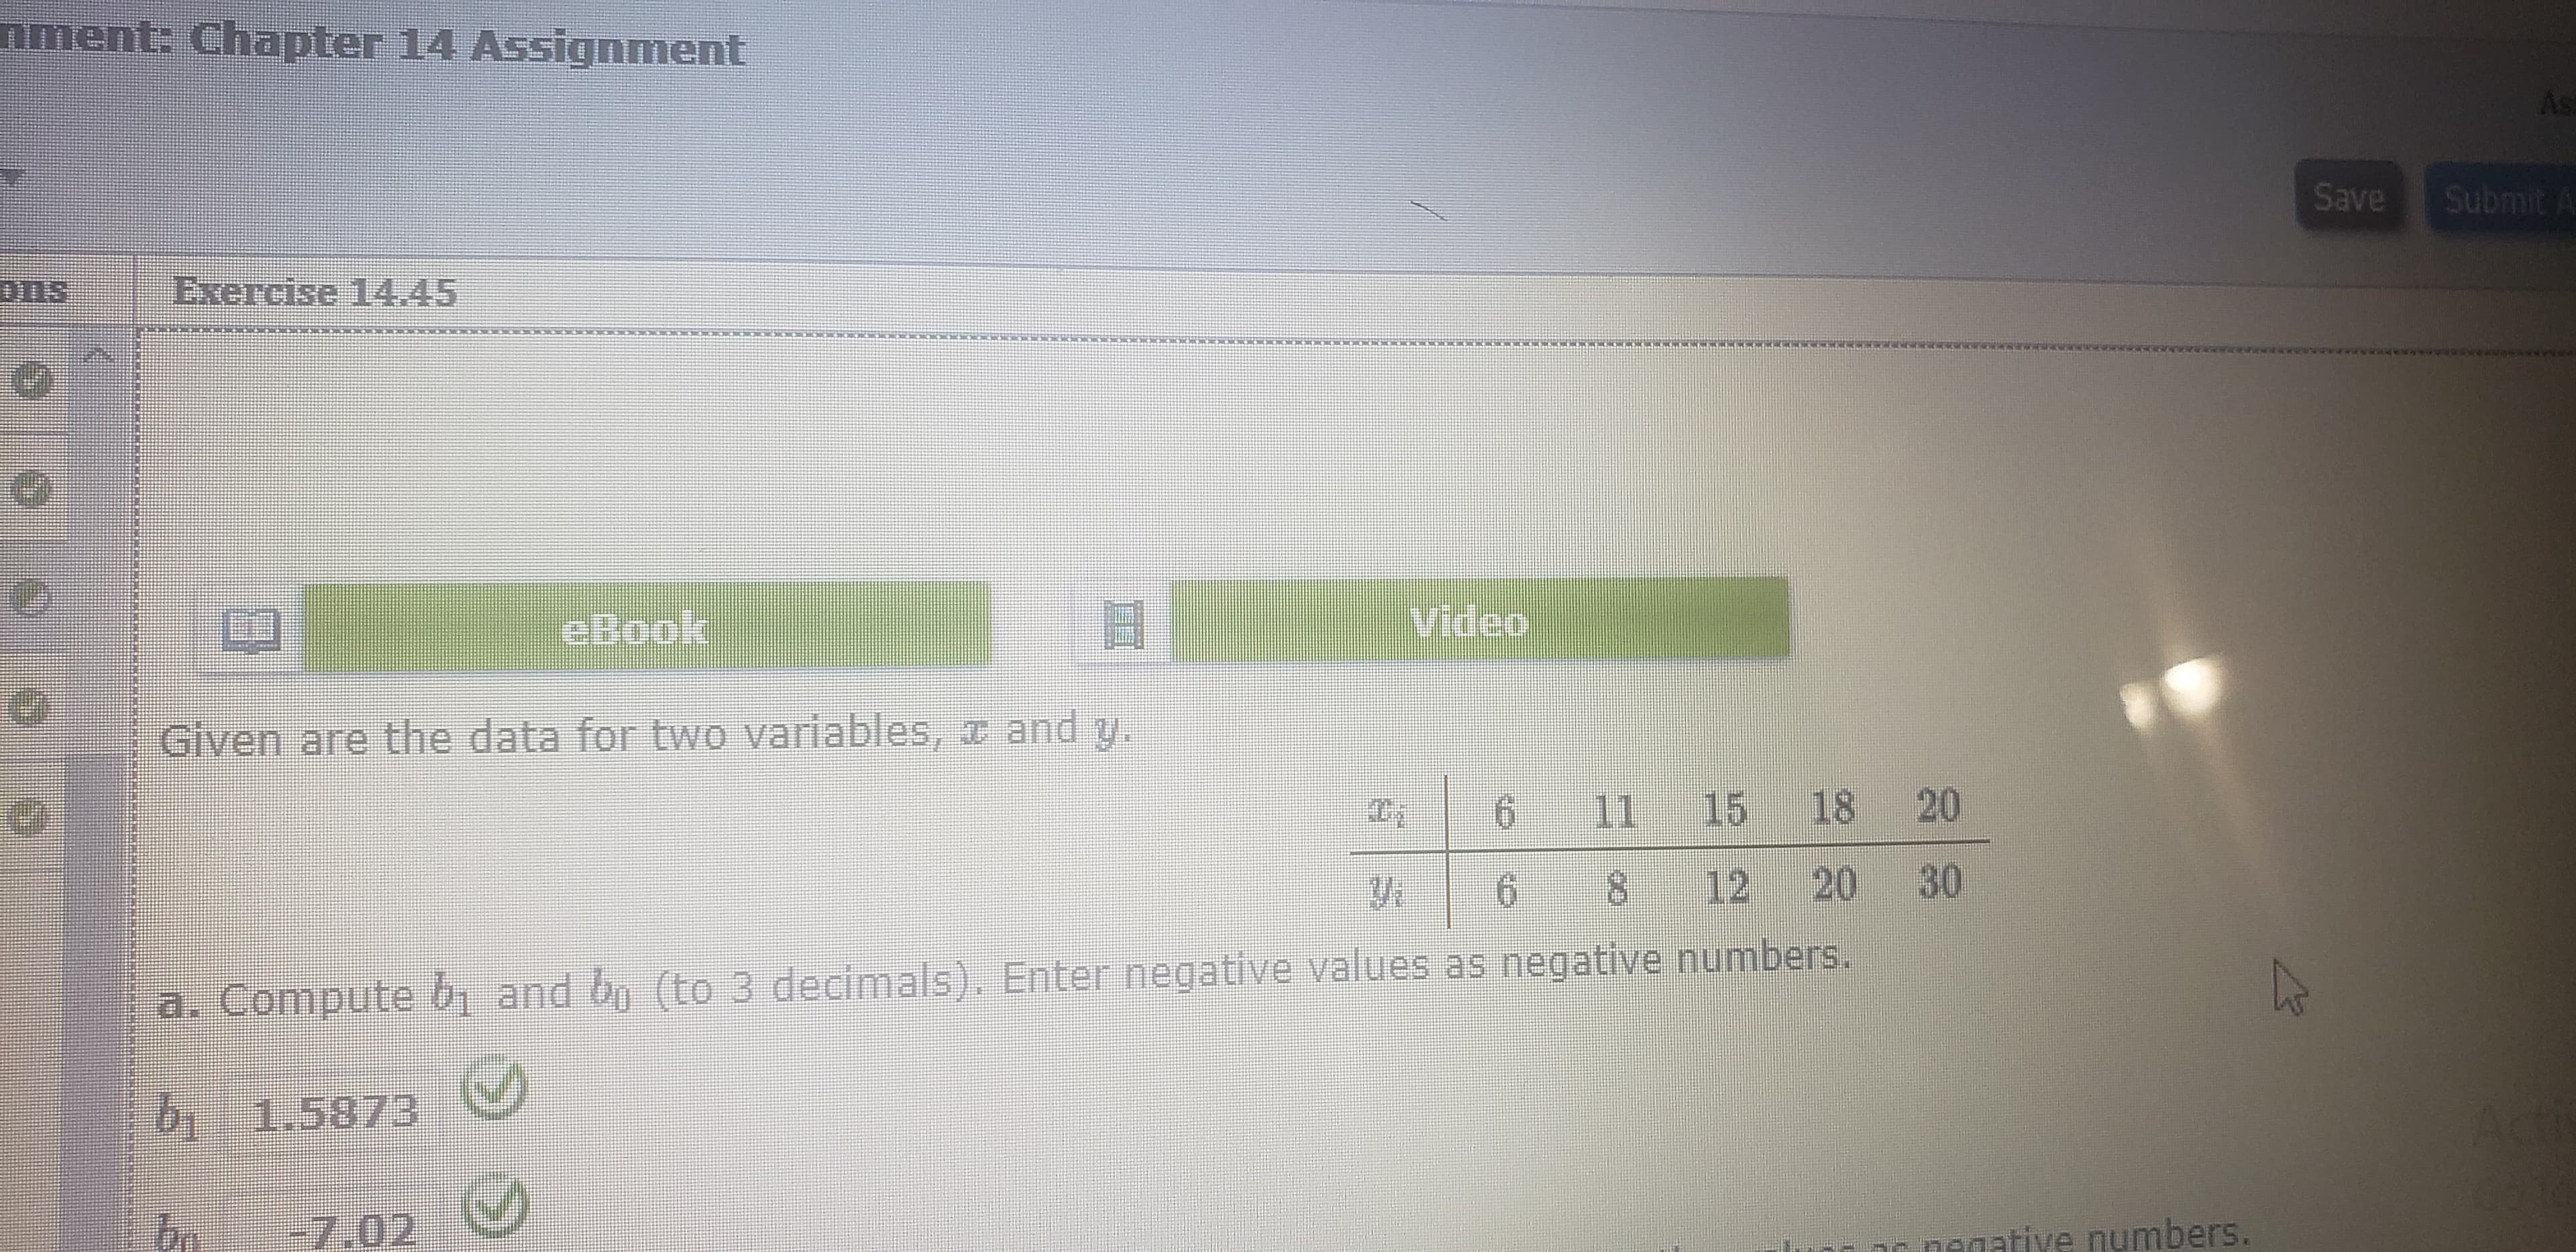 nment: Chapter 14 Assignment
Asi
Submit A
Save
ons
Exercise 14.45
Video
eBook
Given are the data for two variables, T and y.
6 11 15 18 20
12 20 30
8.
9.
Compute b and bo (to 3 decimals). Enter negative values as negative numbers.
a.
611.58/3
-7.02
negative numbers.
